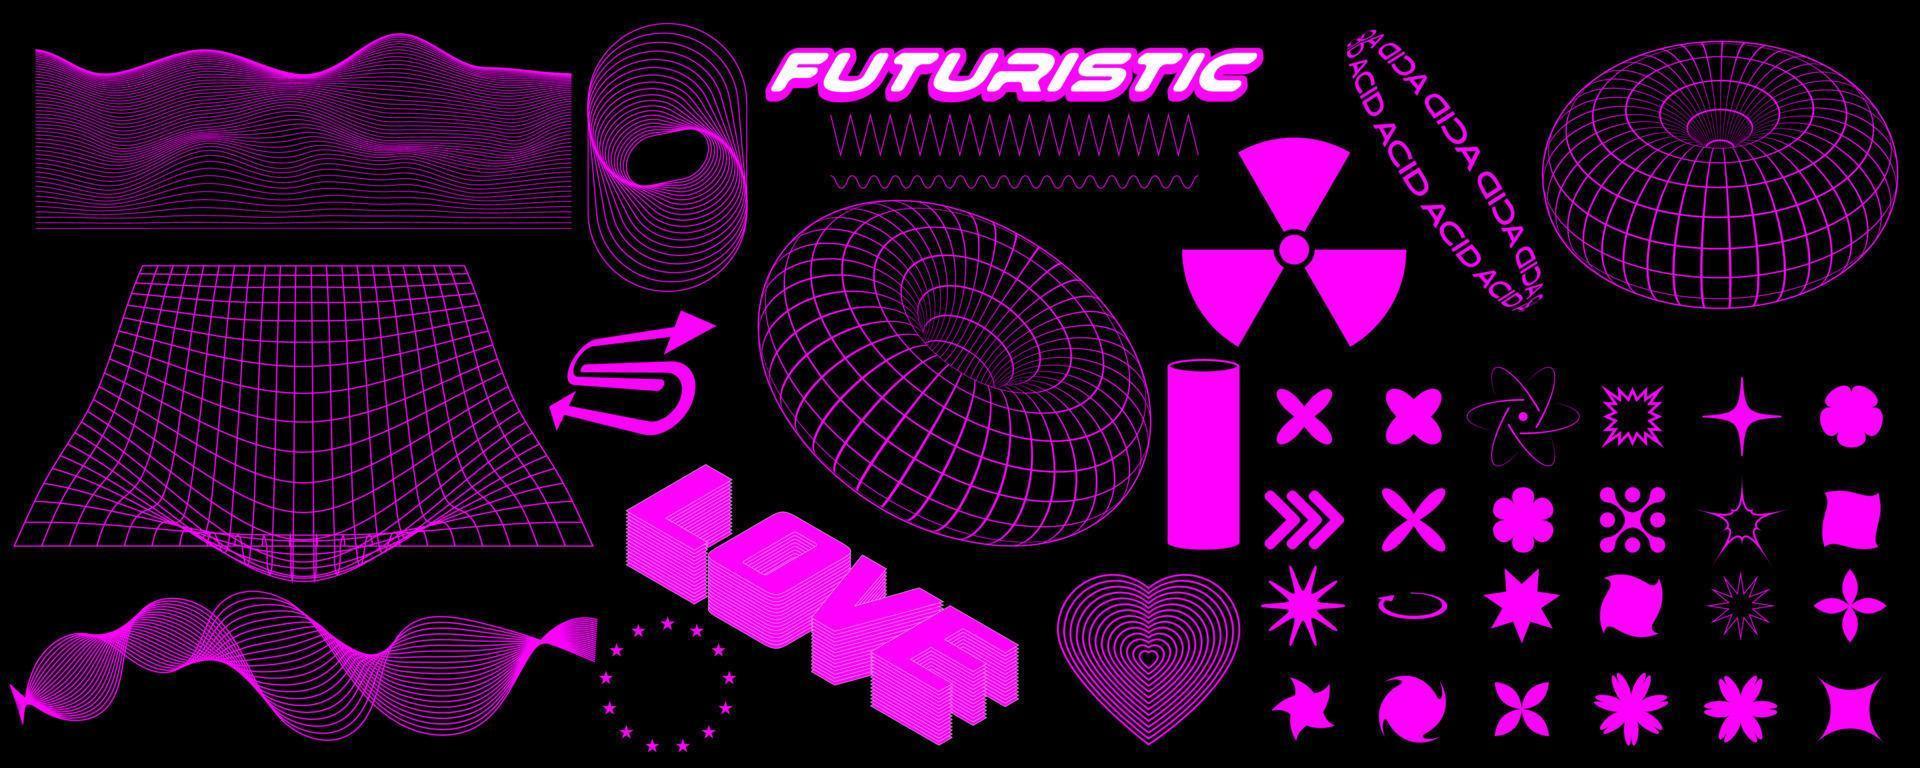 Retro futuristic design elements. 3D wireframe shapes in trendy retro cyberpunk 80s 90s style. Y2k aesthetic. vector